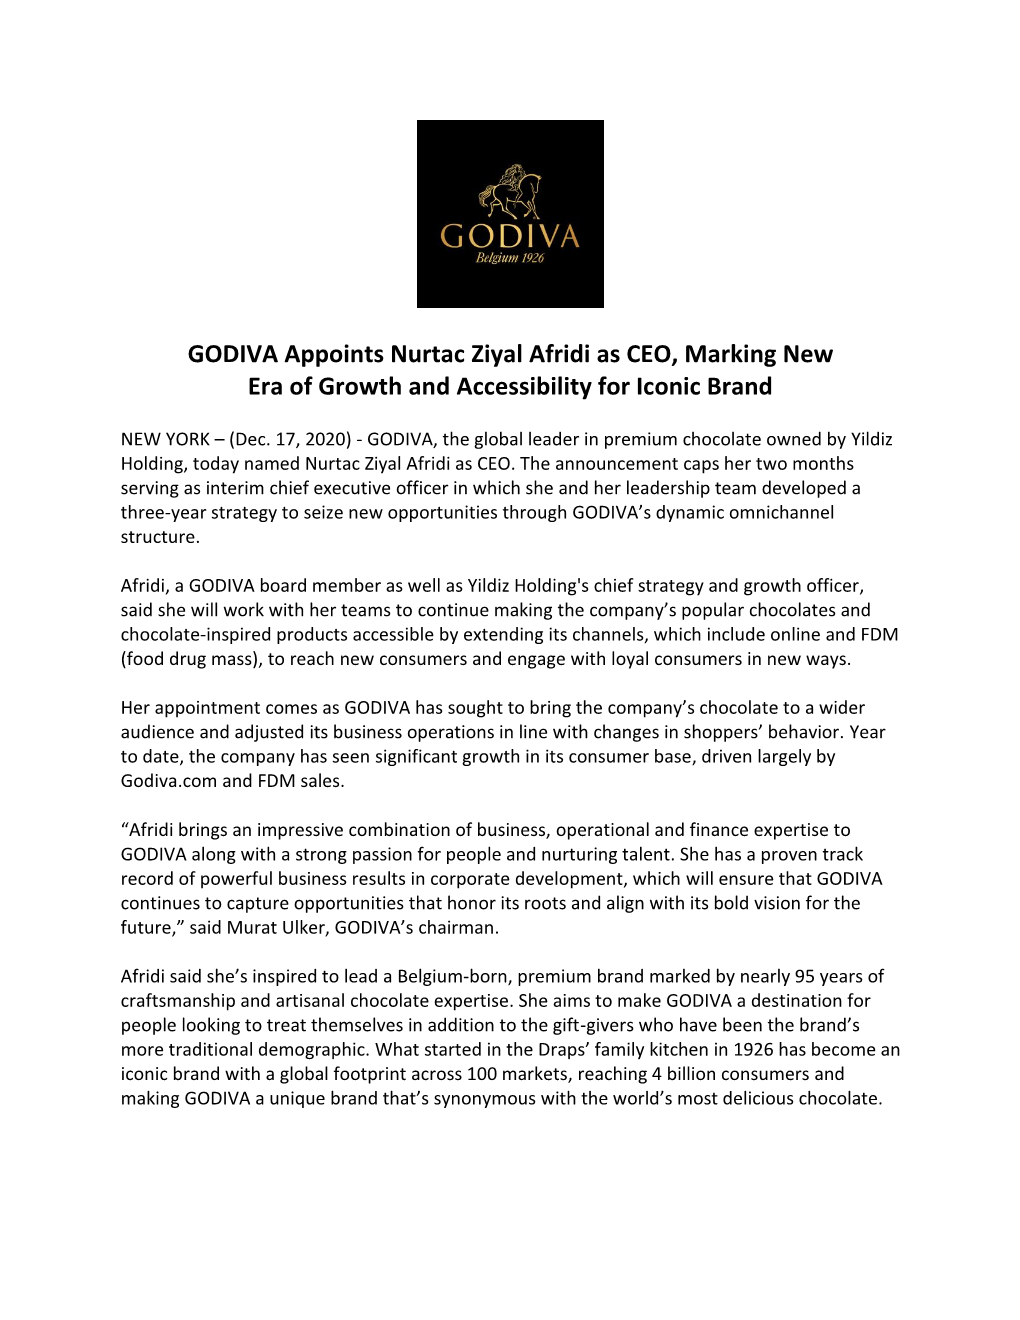 GODIVA Appoints Nurtac Ziyal Afridi As CEO, Marking New Era of Growth and Accessibility for Iconic Brand